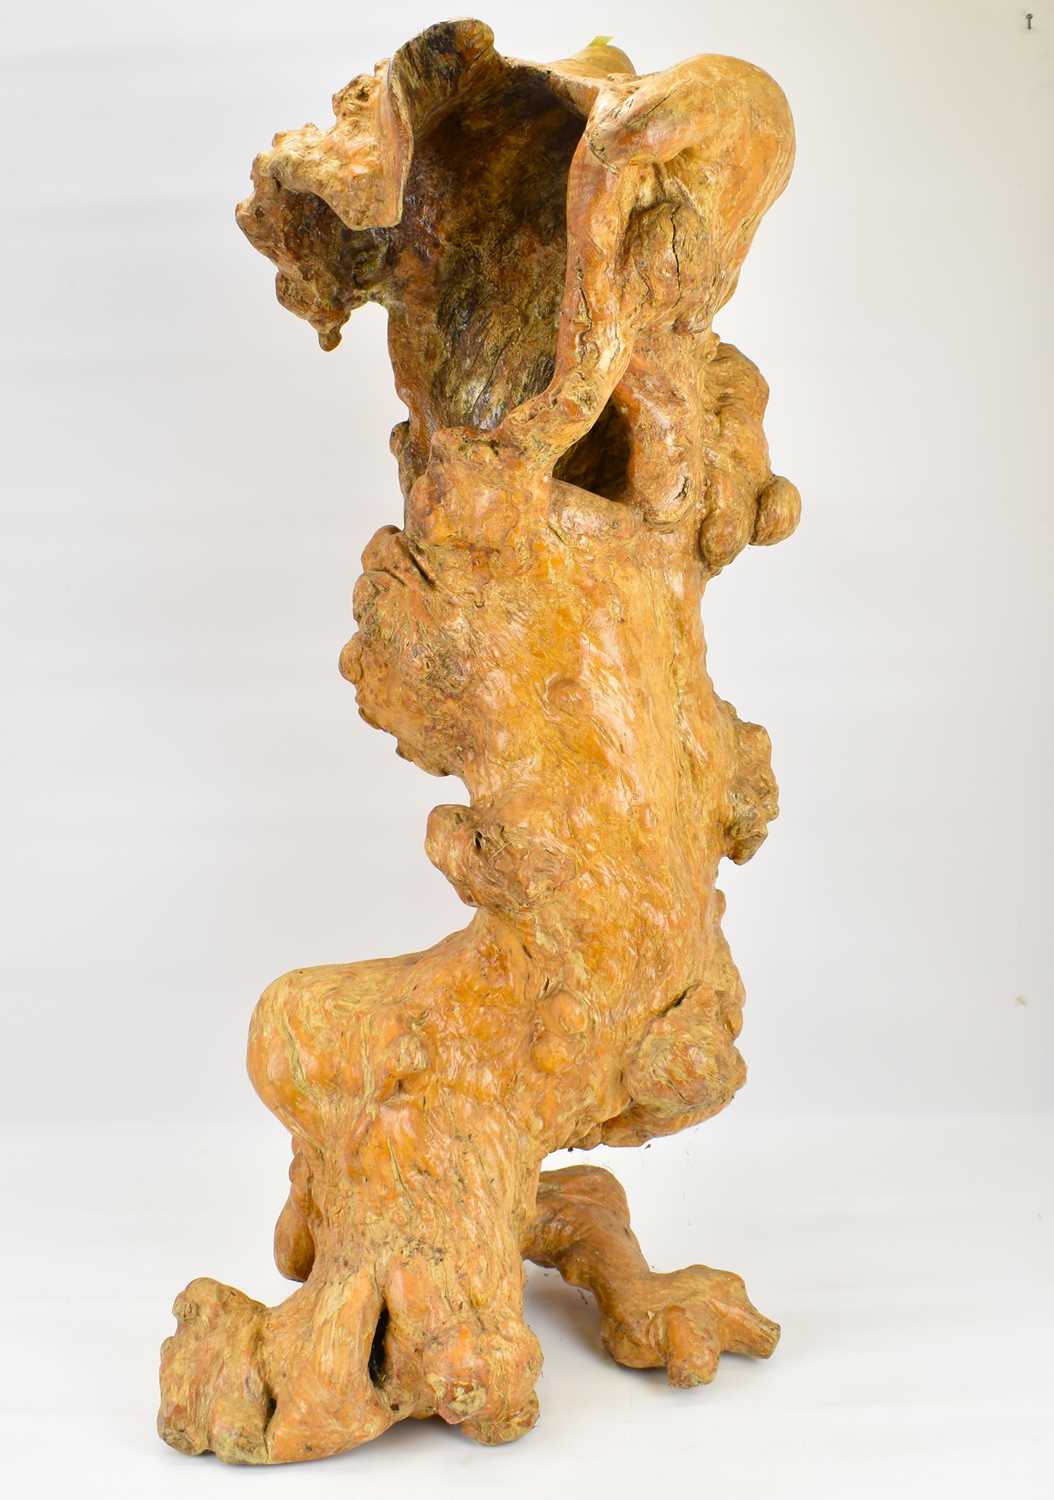 A large decorative tree root sculpture with a polished patina, approx. 95 x 50cm. - Image 2 of 2